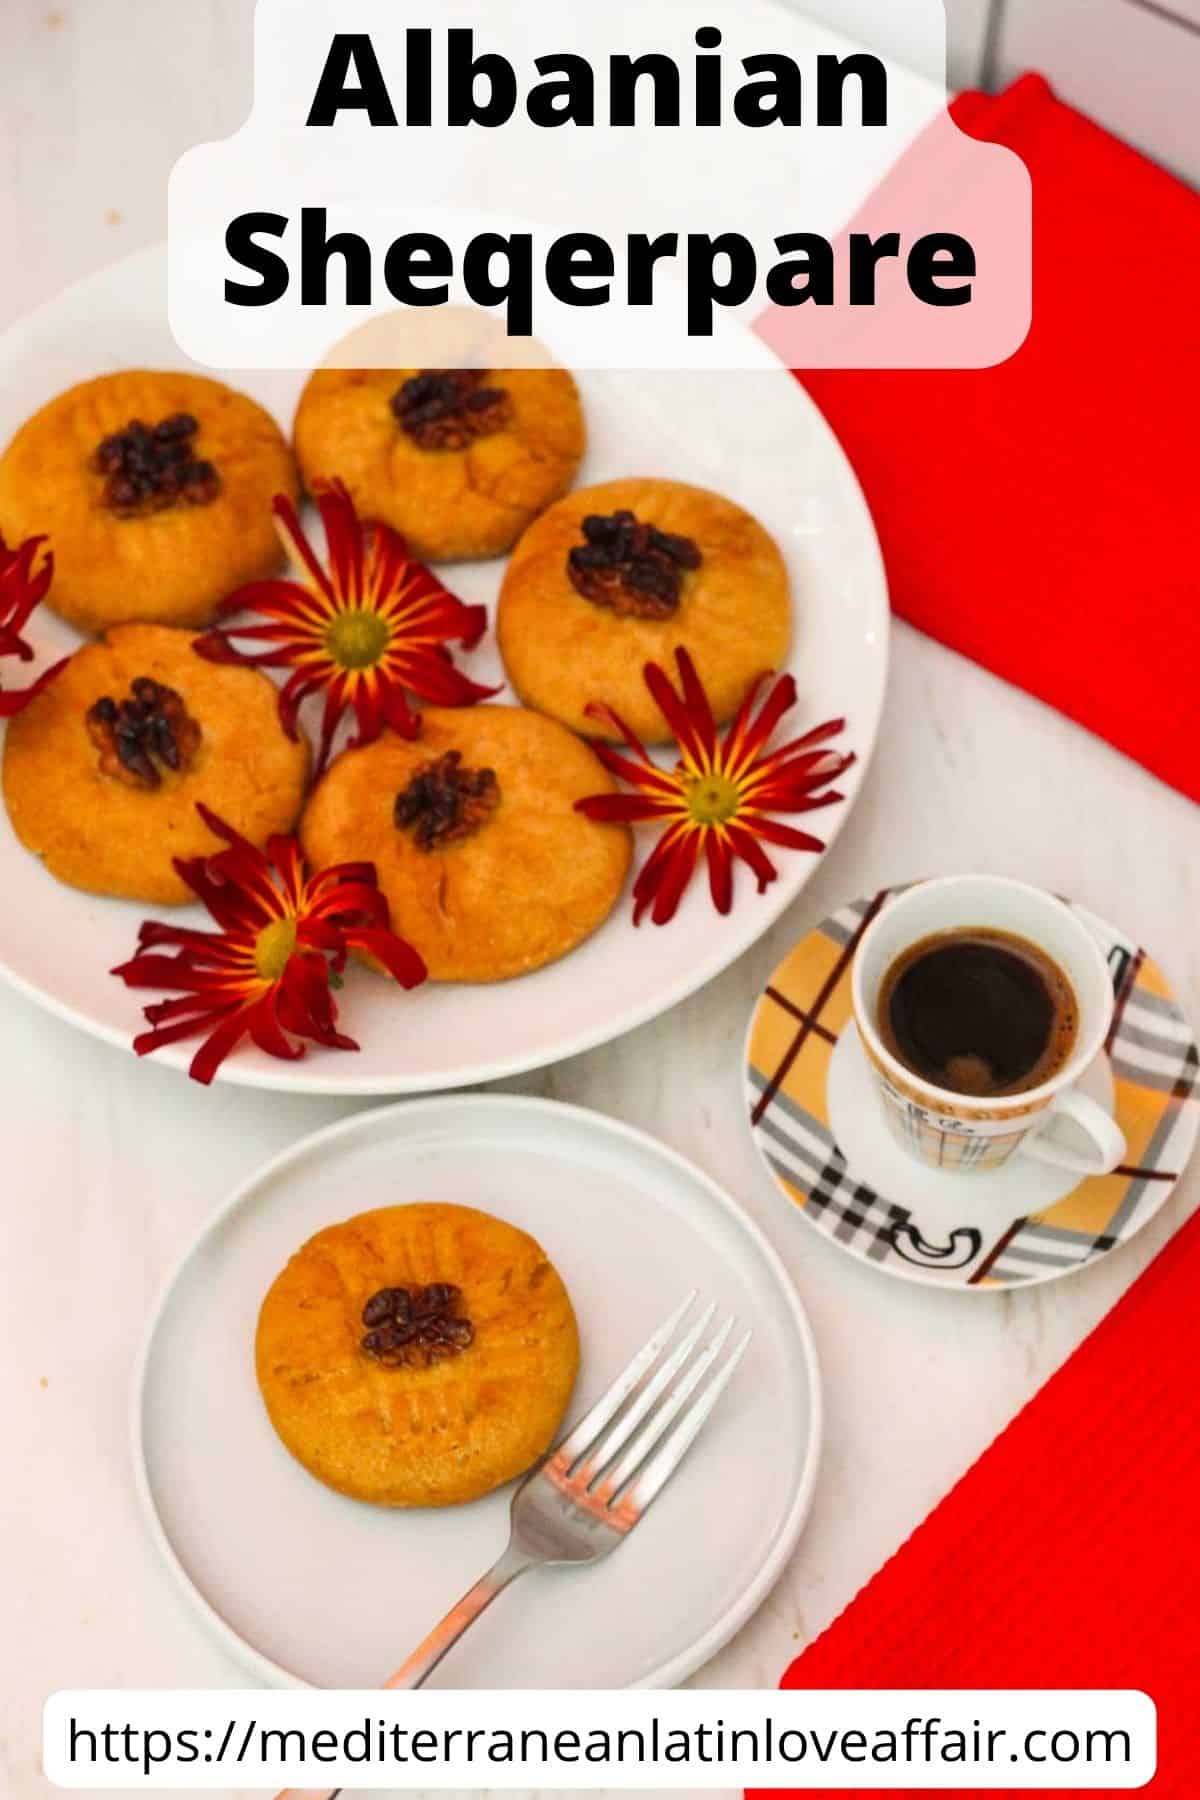 An image prepared for Pinterest. It shows a picture of Albanian Sheqerpare cookies (shortbread cookies) in a serving platter plus a single served cookie. There's a Turkish coffee next to the cookie platter. There's a title bar over the image on top and a website link at the bottom.